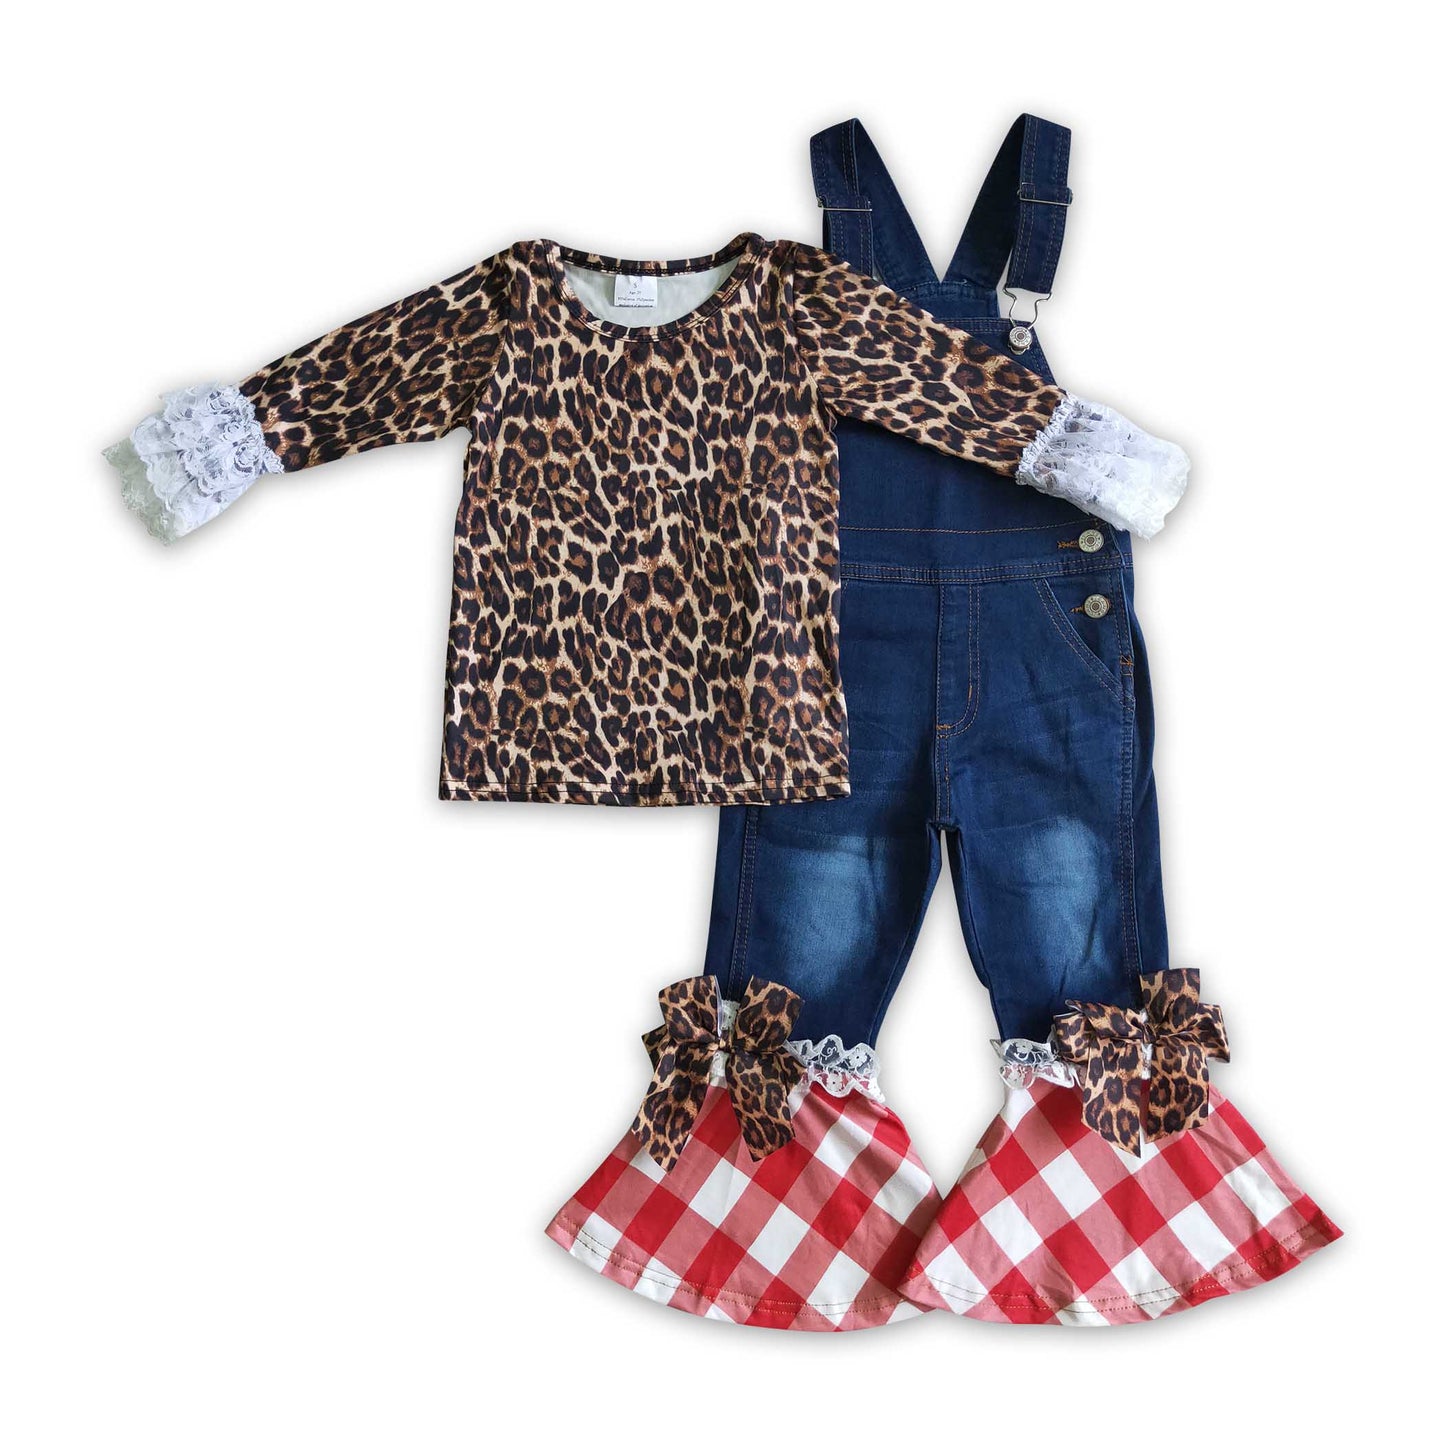 Leopard shirt red plaid denim overalls girls Christmas outfits